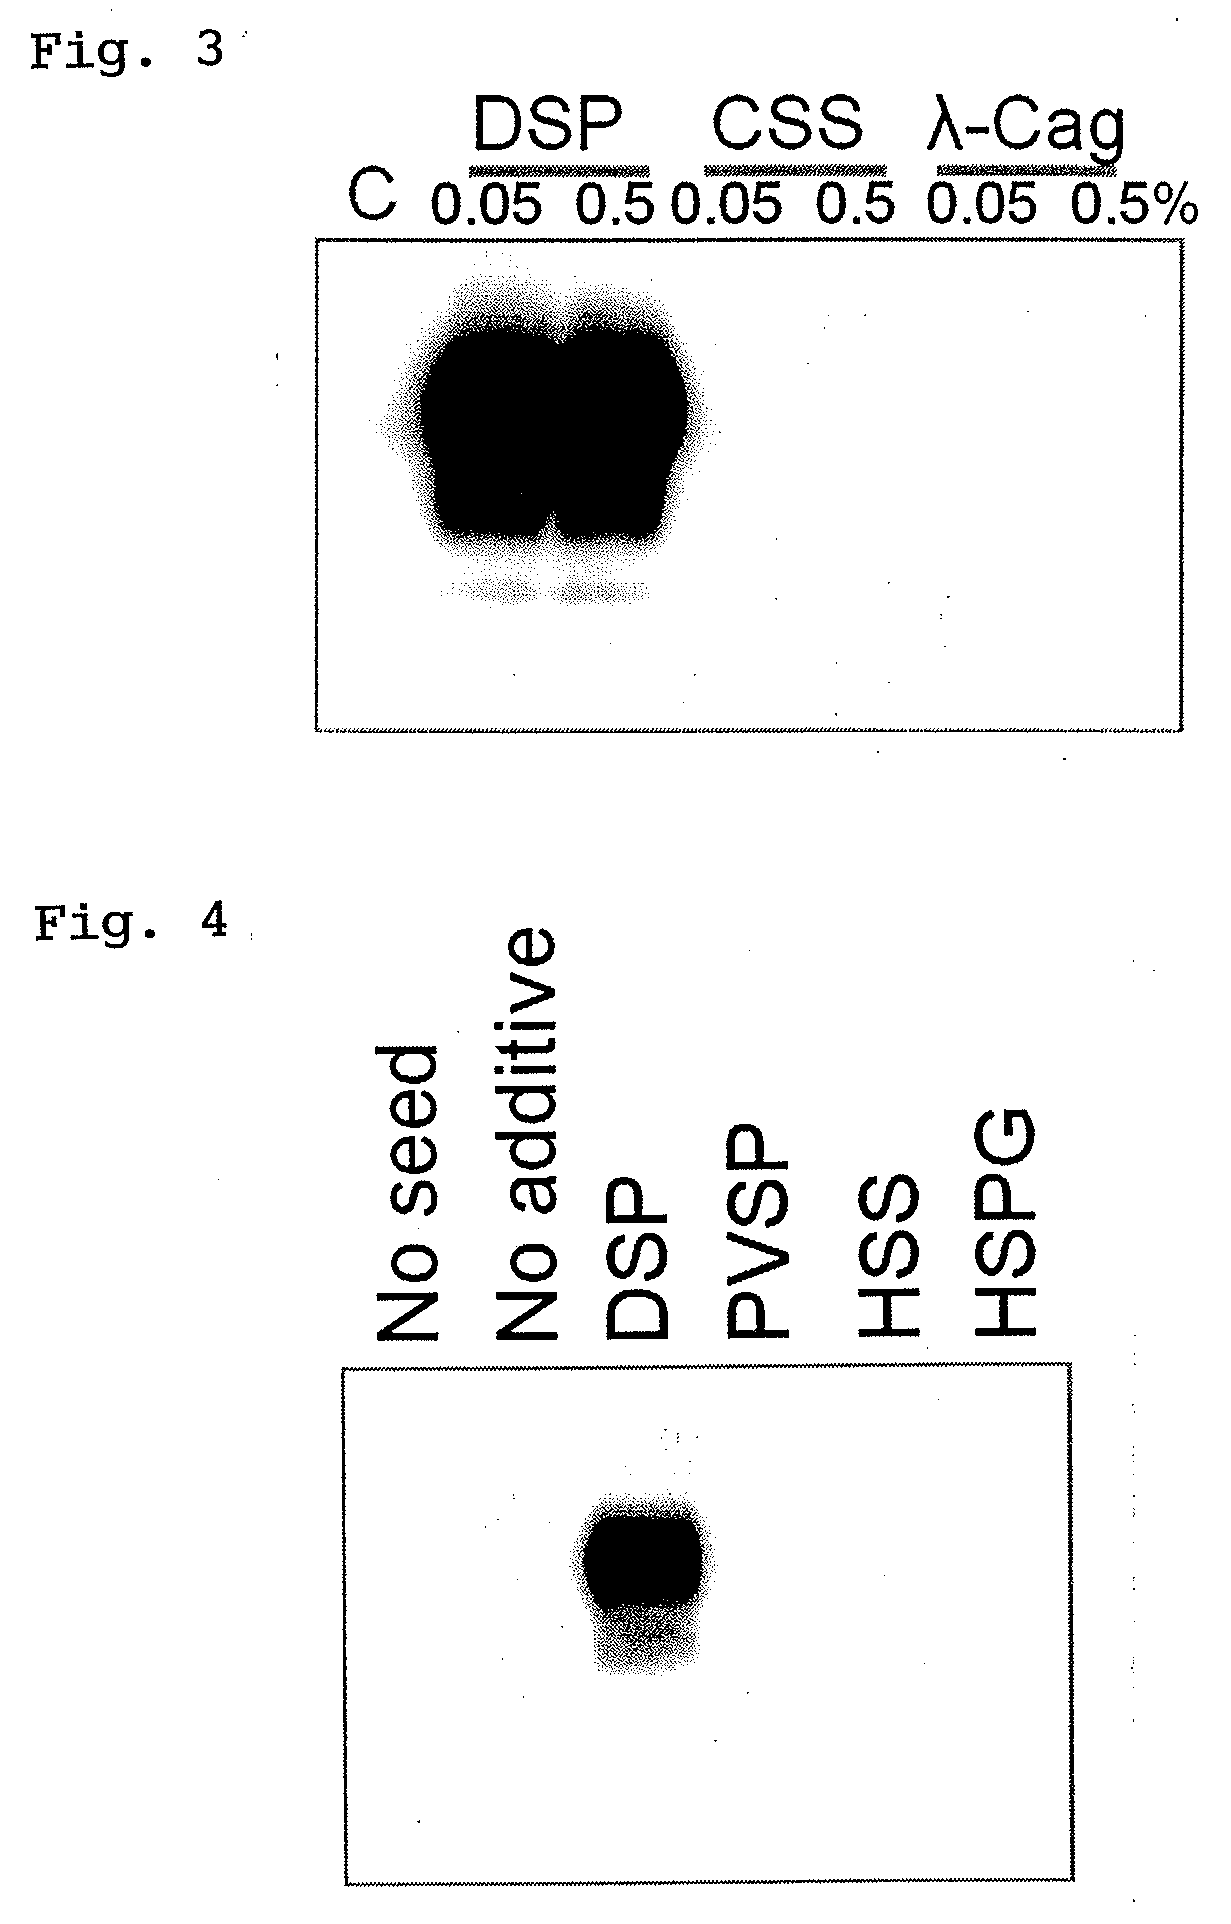 Method for efficiently  amplifying abnormal prion protein derived from bse